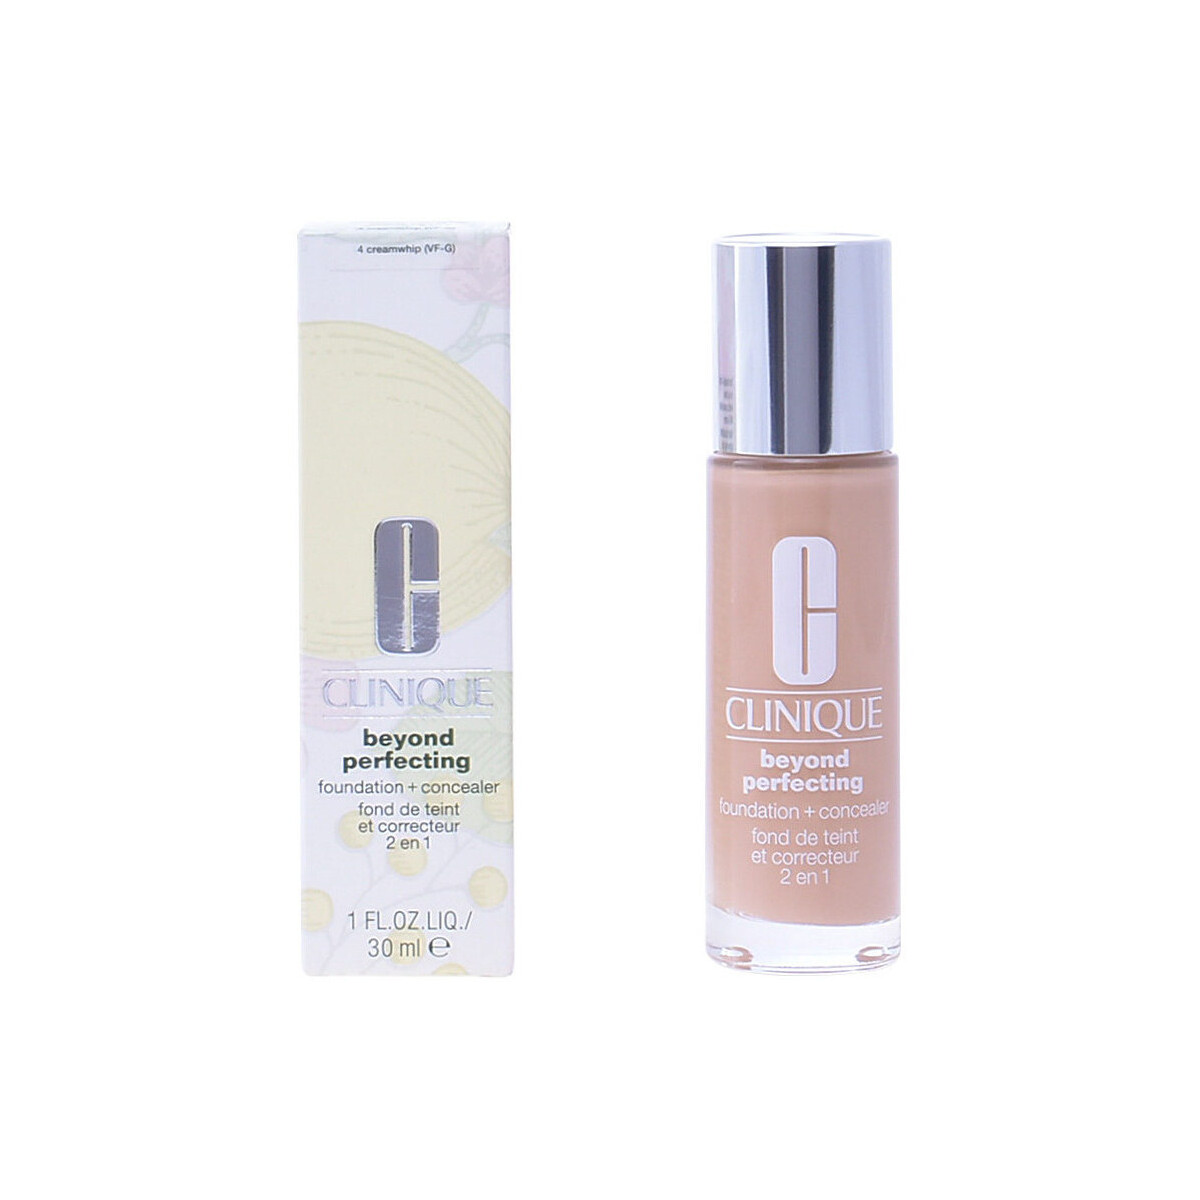 Beauty Make-up & Foundation  Clinique Beyond Perfecting Foundation + Concealer 4-creamwhip 